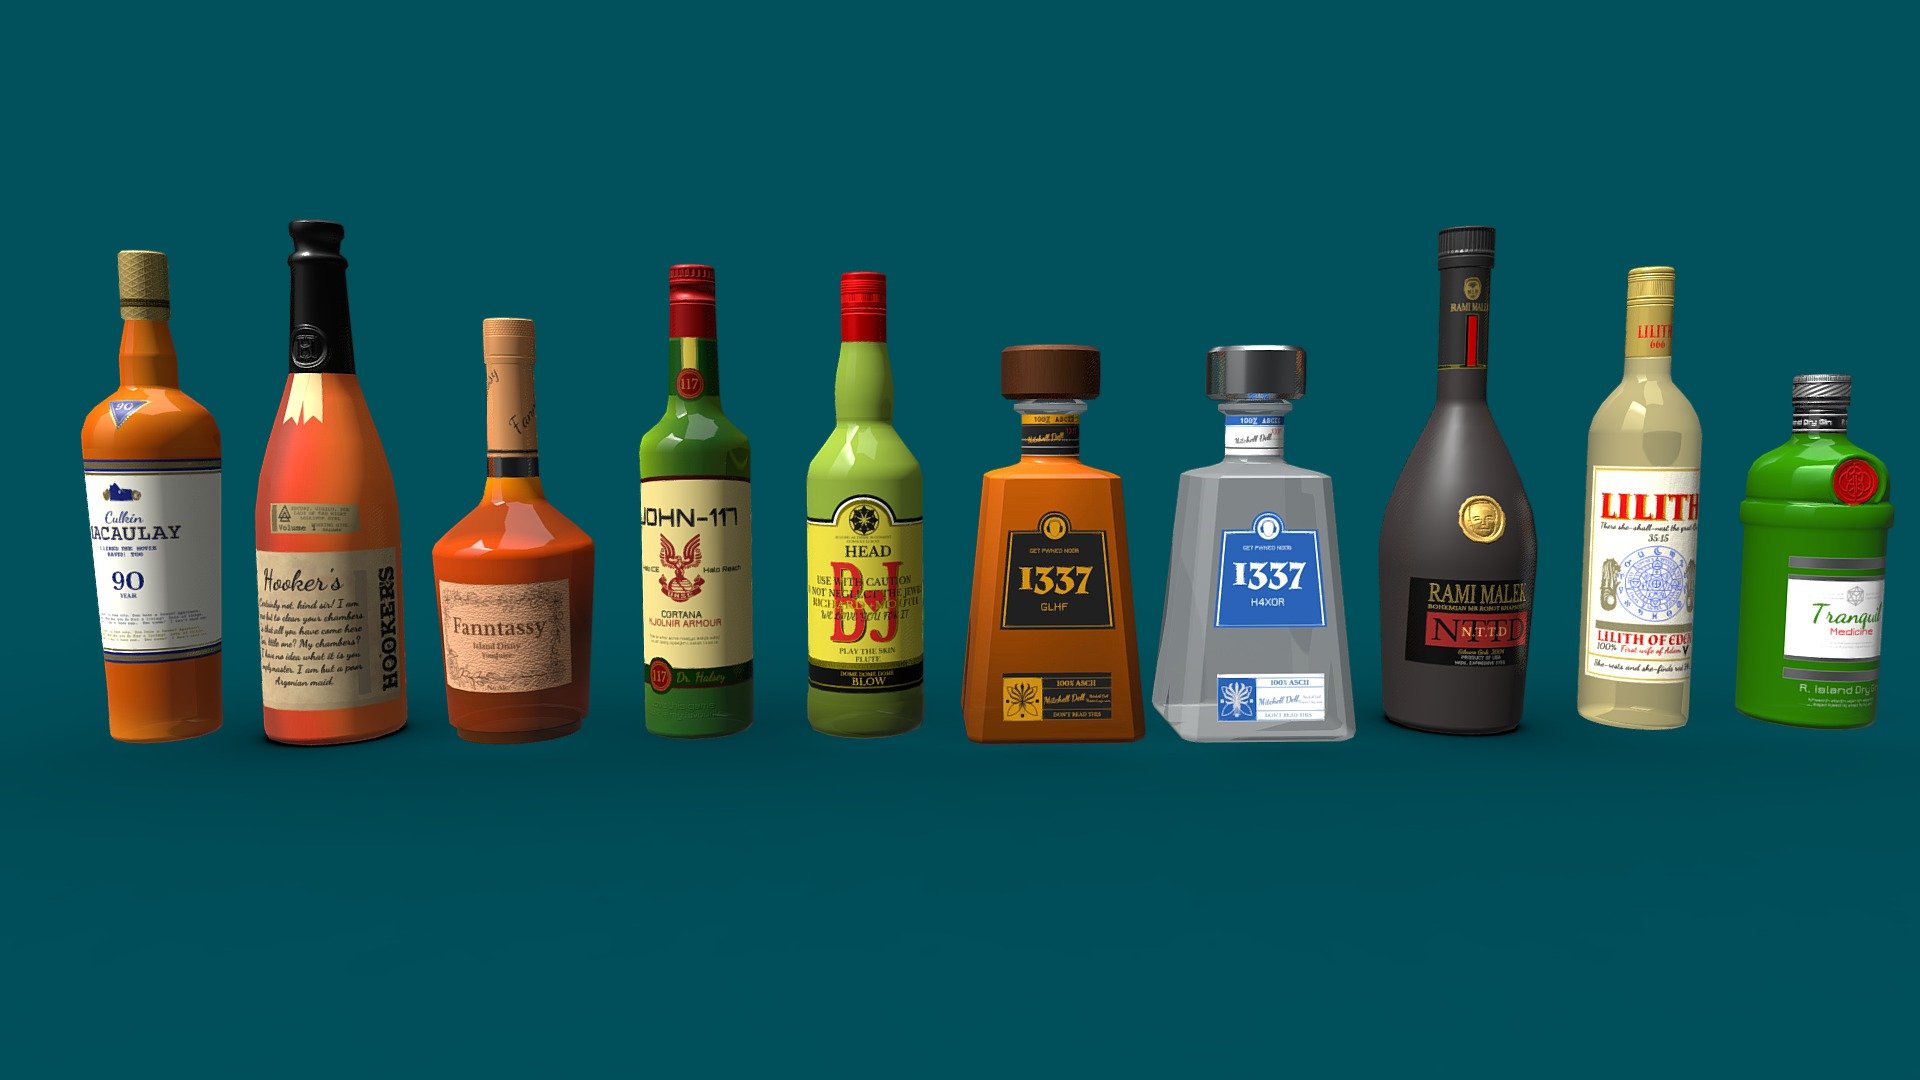 In process of creating a bar scene. These are the collection 1/5
Had fun making these
Created with Maya, Substance Painter, and Photoshop.
4k texture for this set 3d model